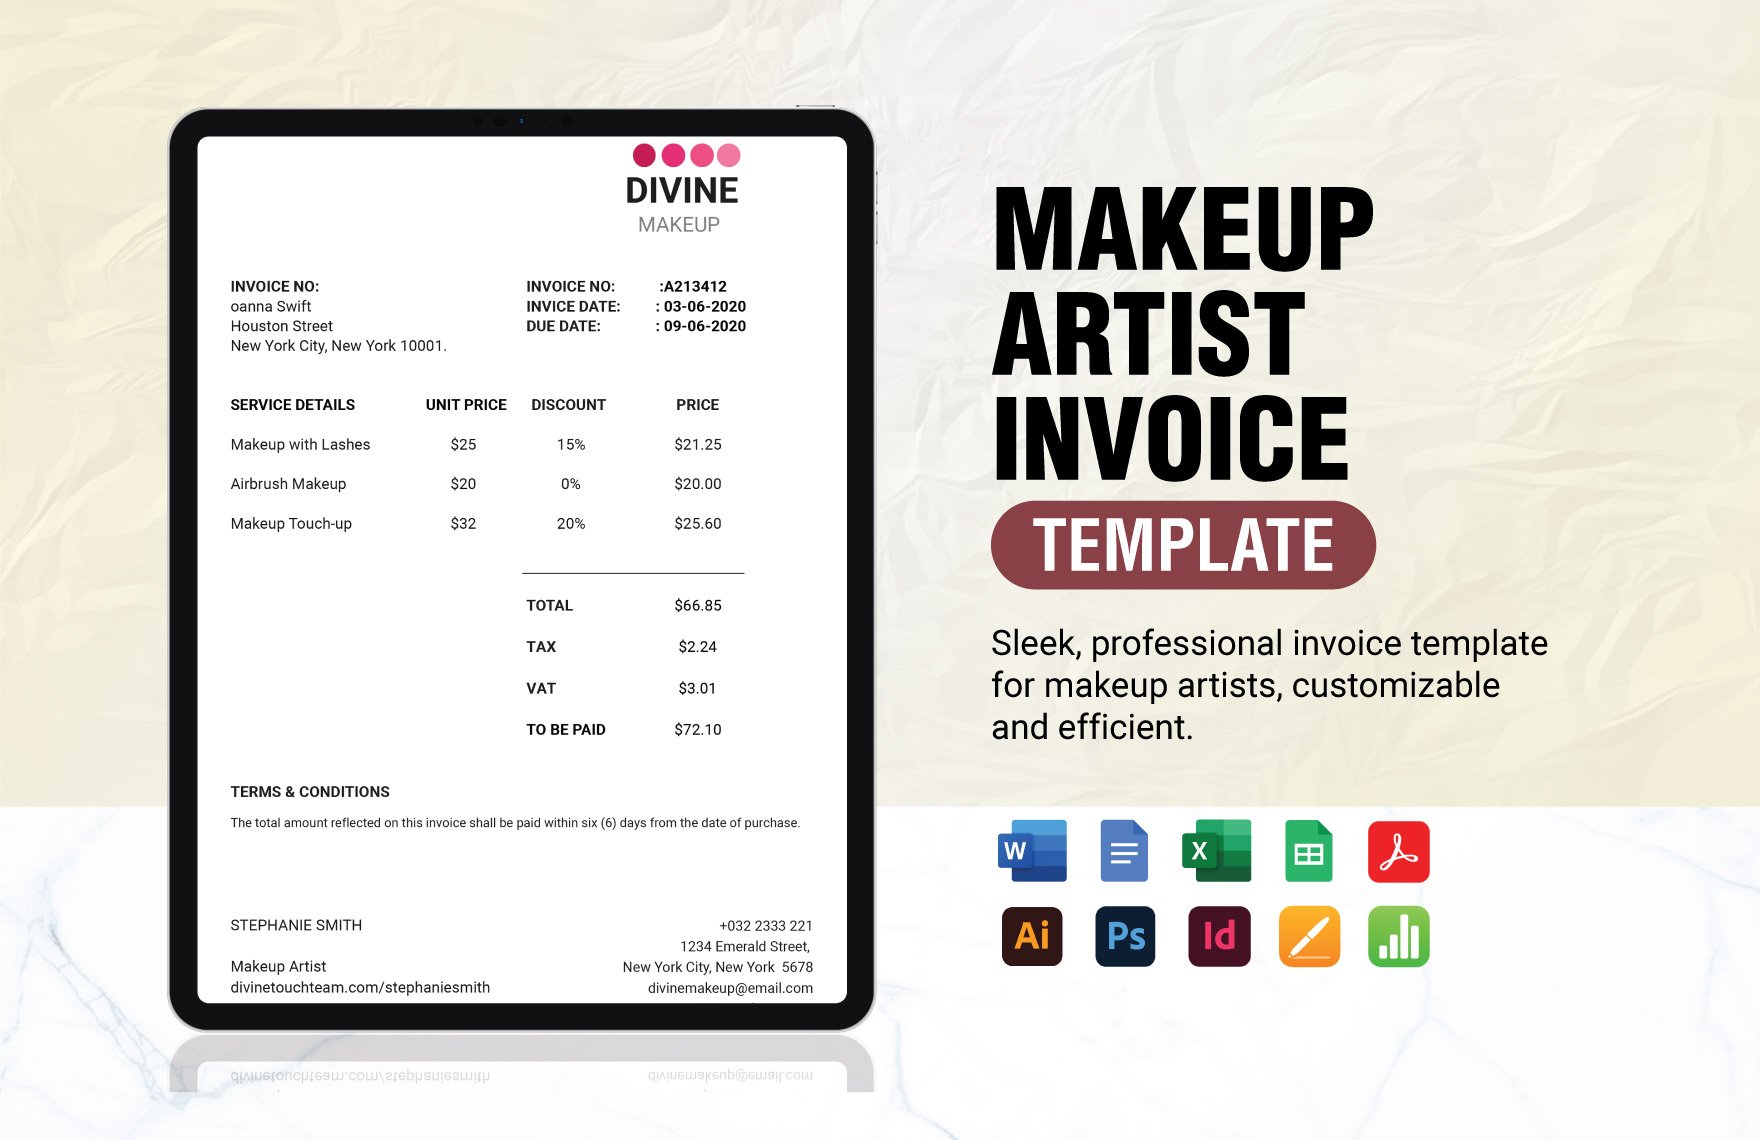 Makeup Artist Invoice Template in Word, Google Docs, Excel, PDF, Google Sheets, Illustrator, PSD, Apple Pages, InDesign, Apple Numbers